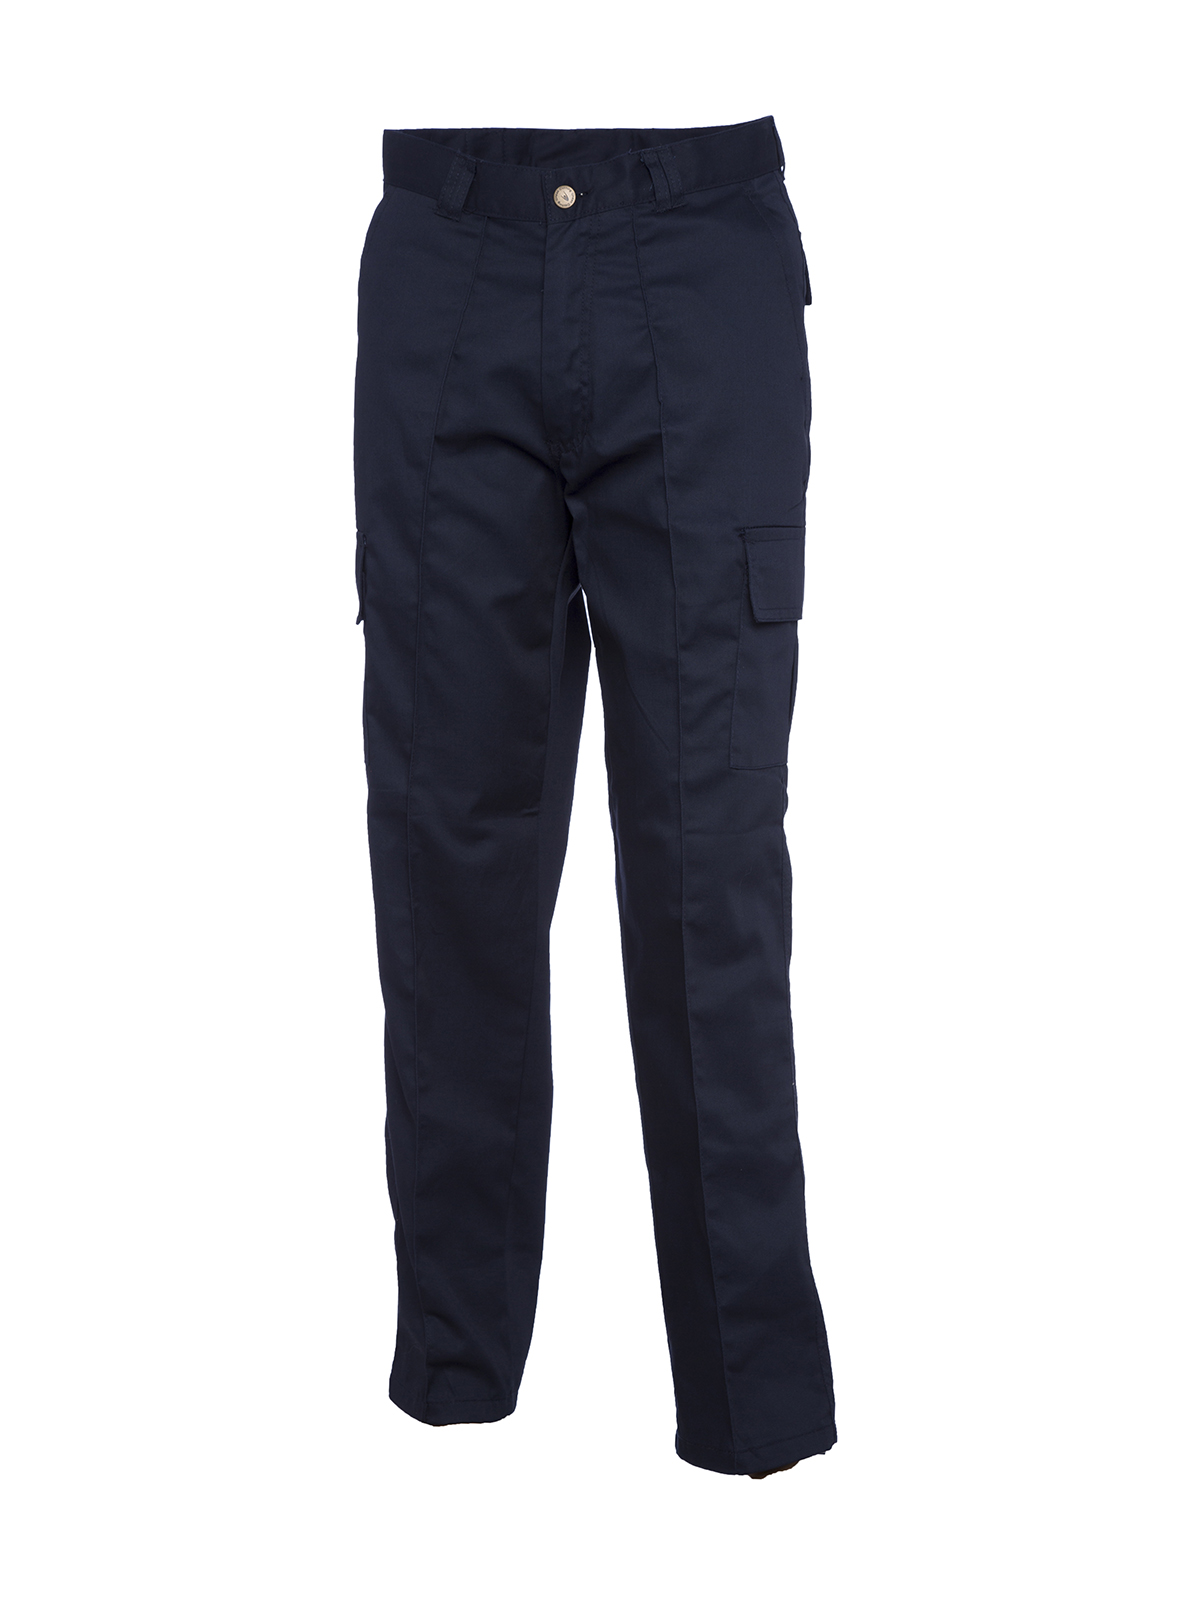 Cargo Trousers, Navy Blue - 44S